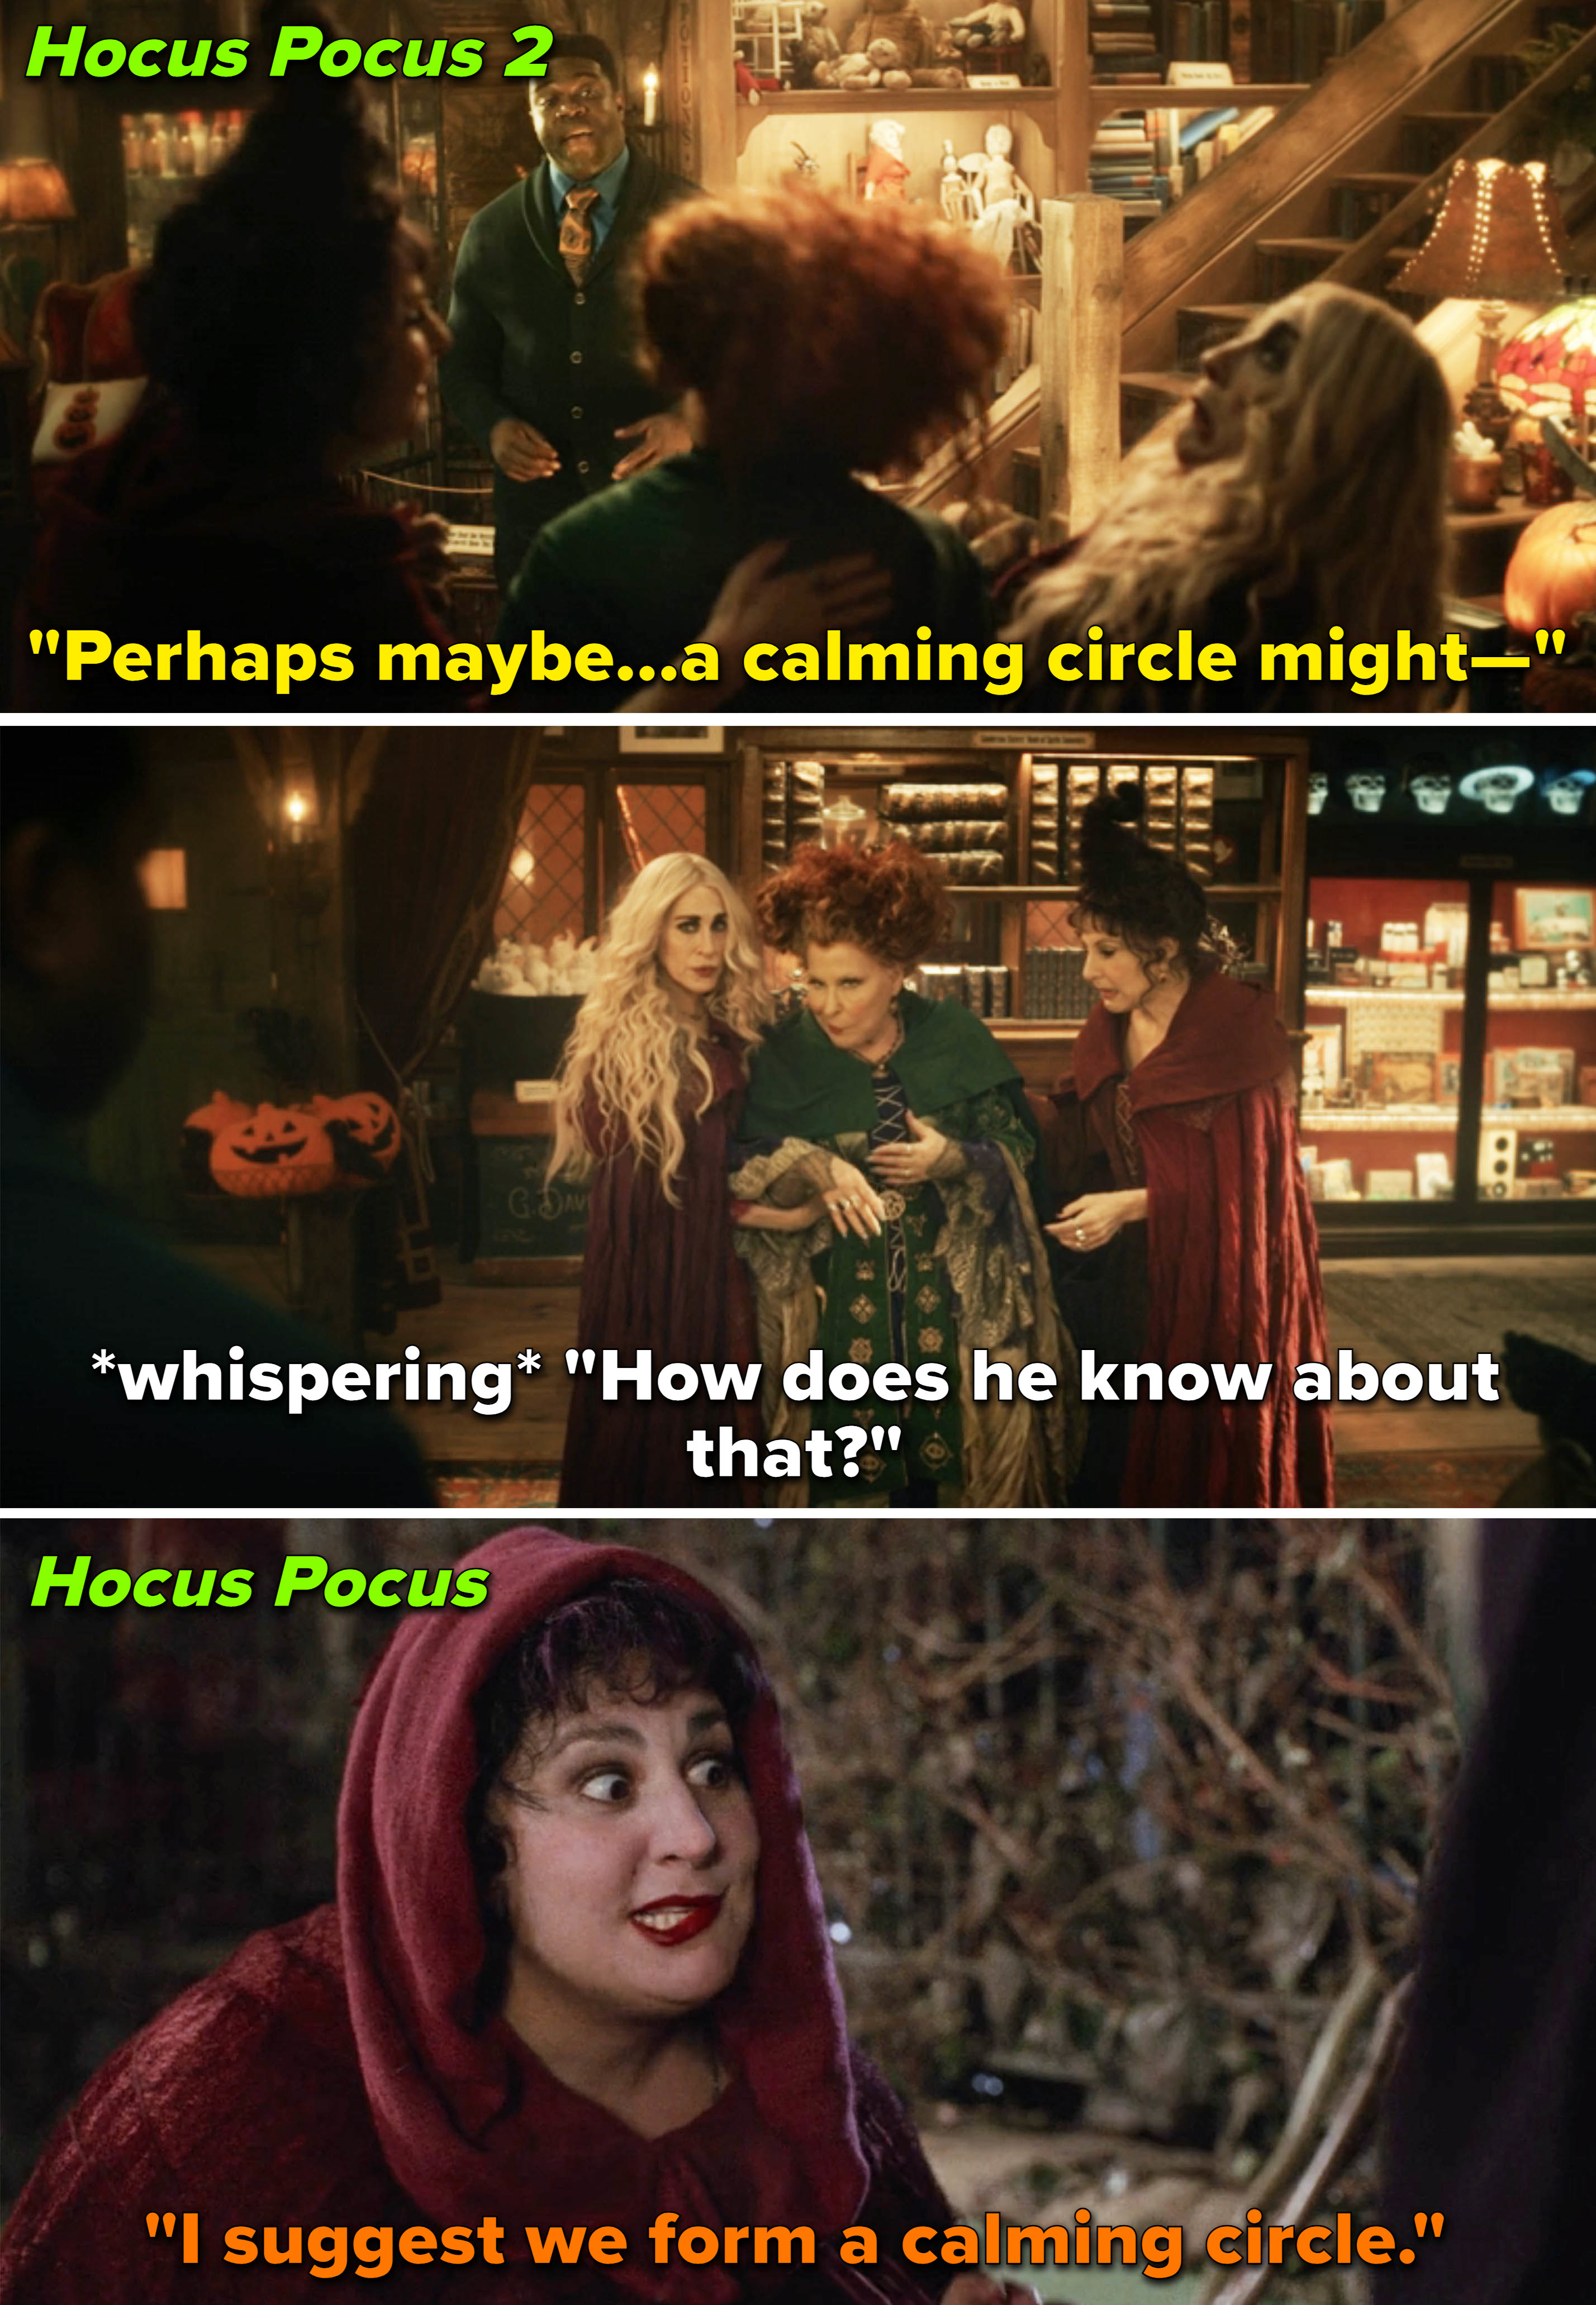 The reference to the &quot;calming circle&quot; in each film